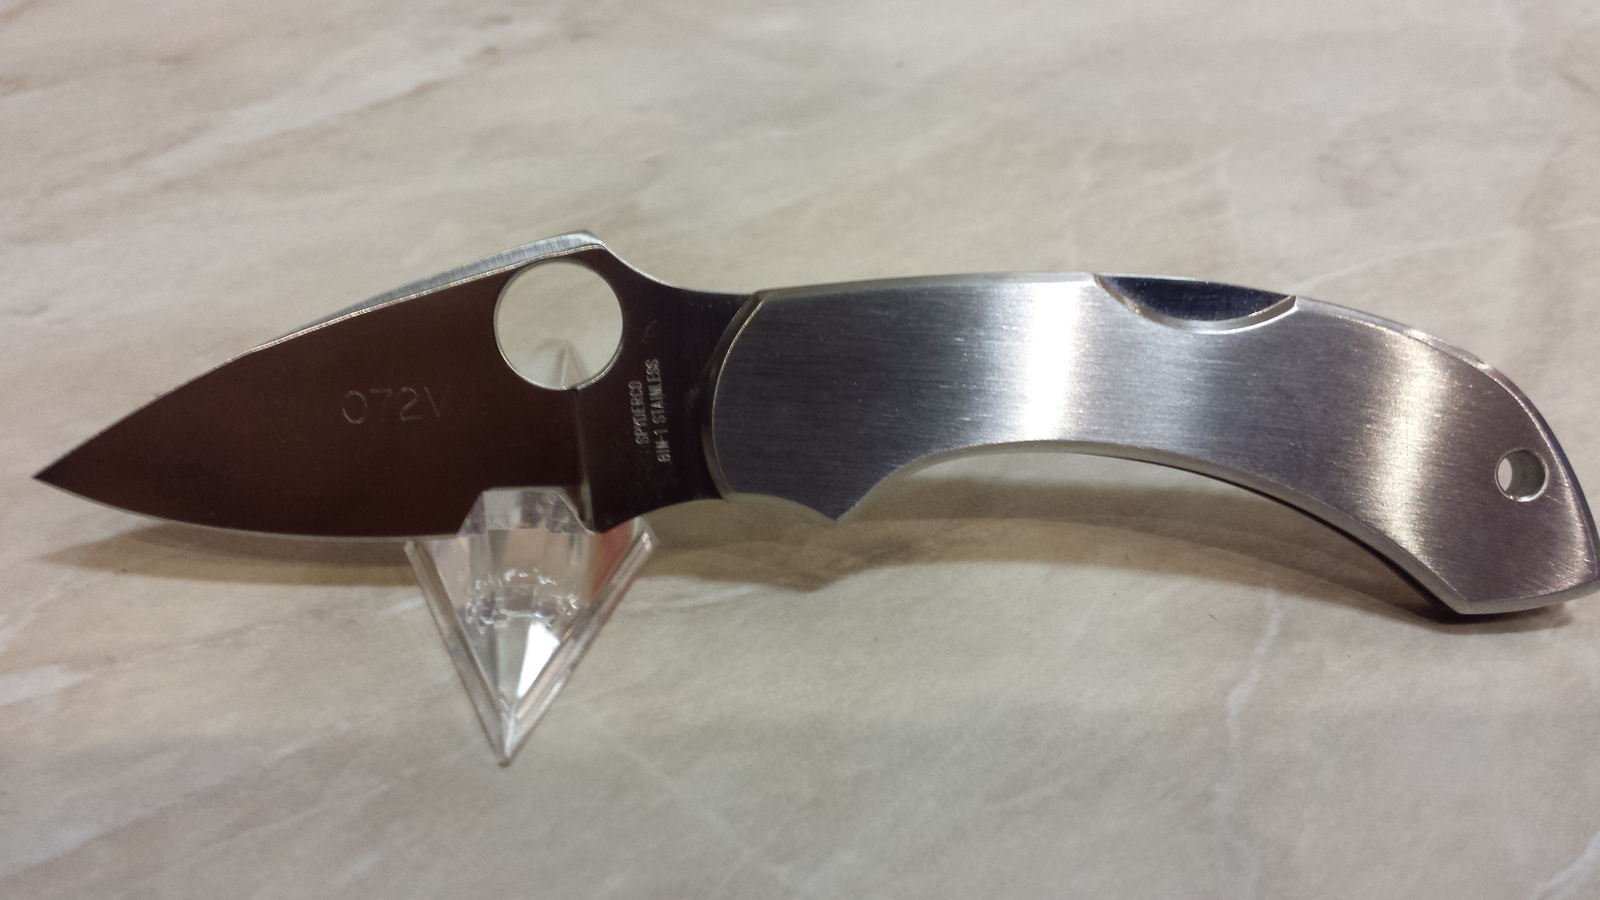 Spyderco Dragonfly 2 Stainless Steel Experimental